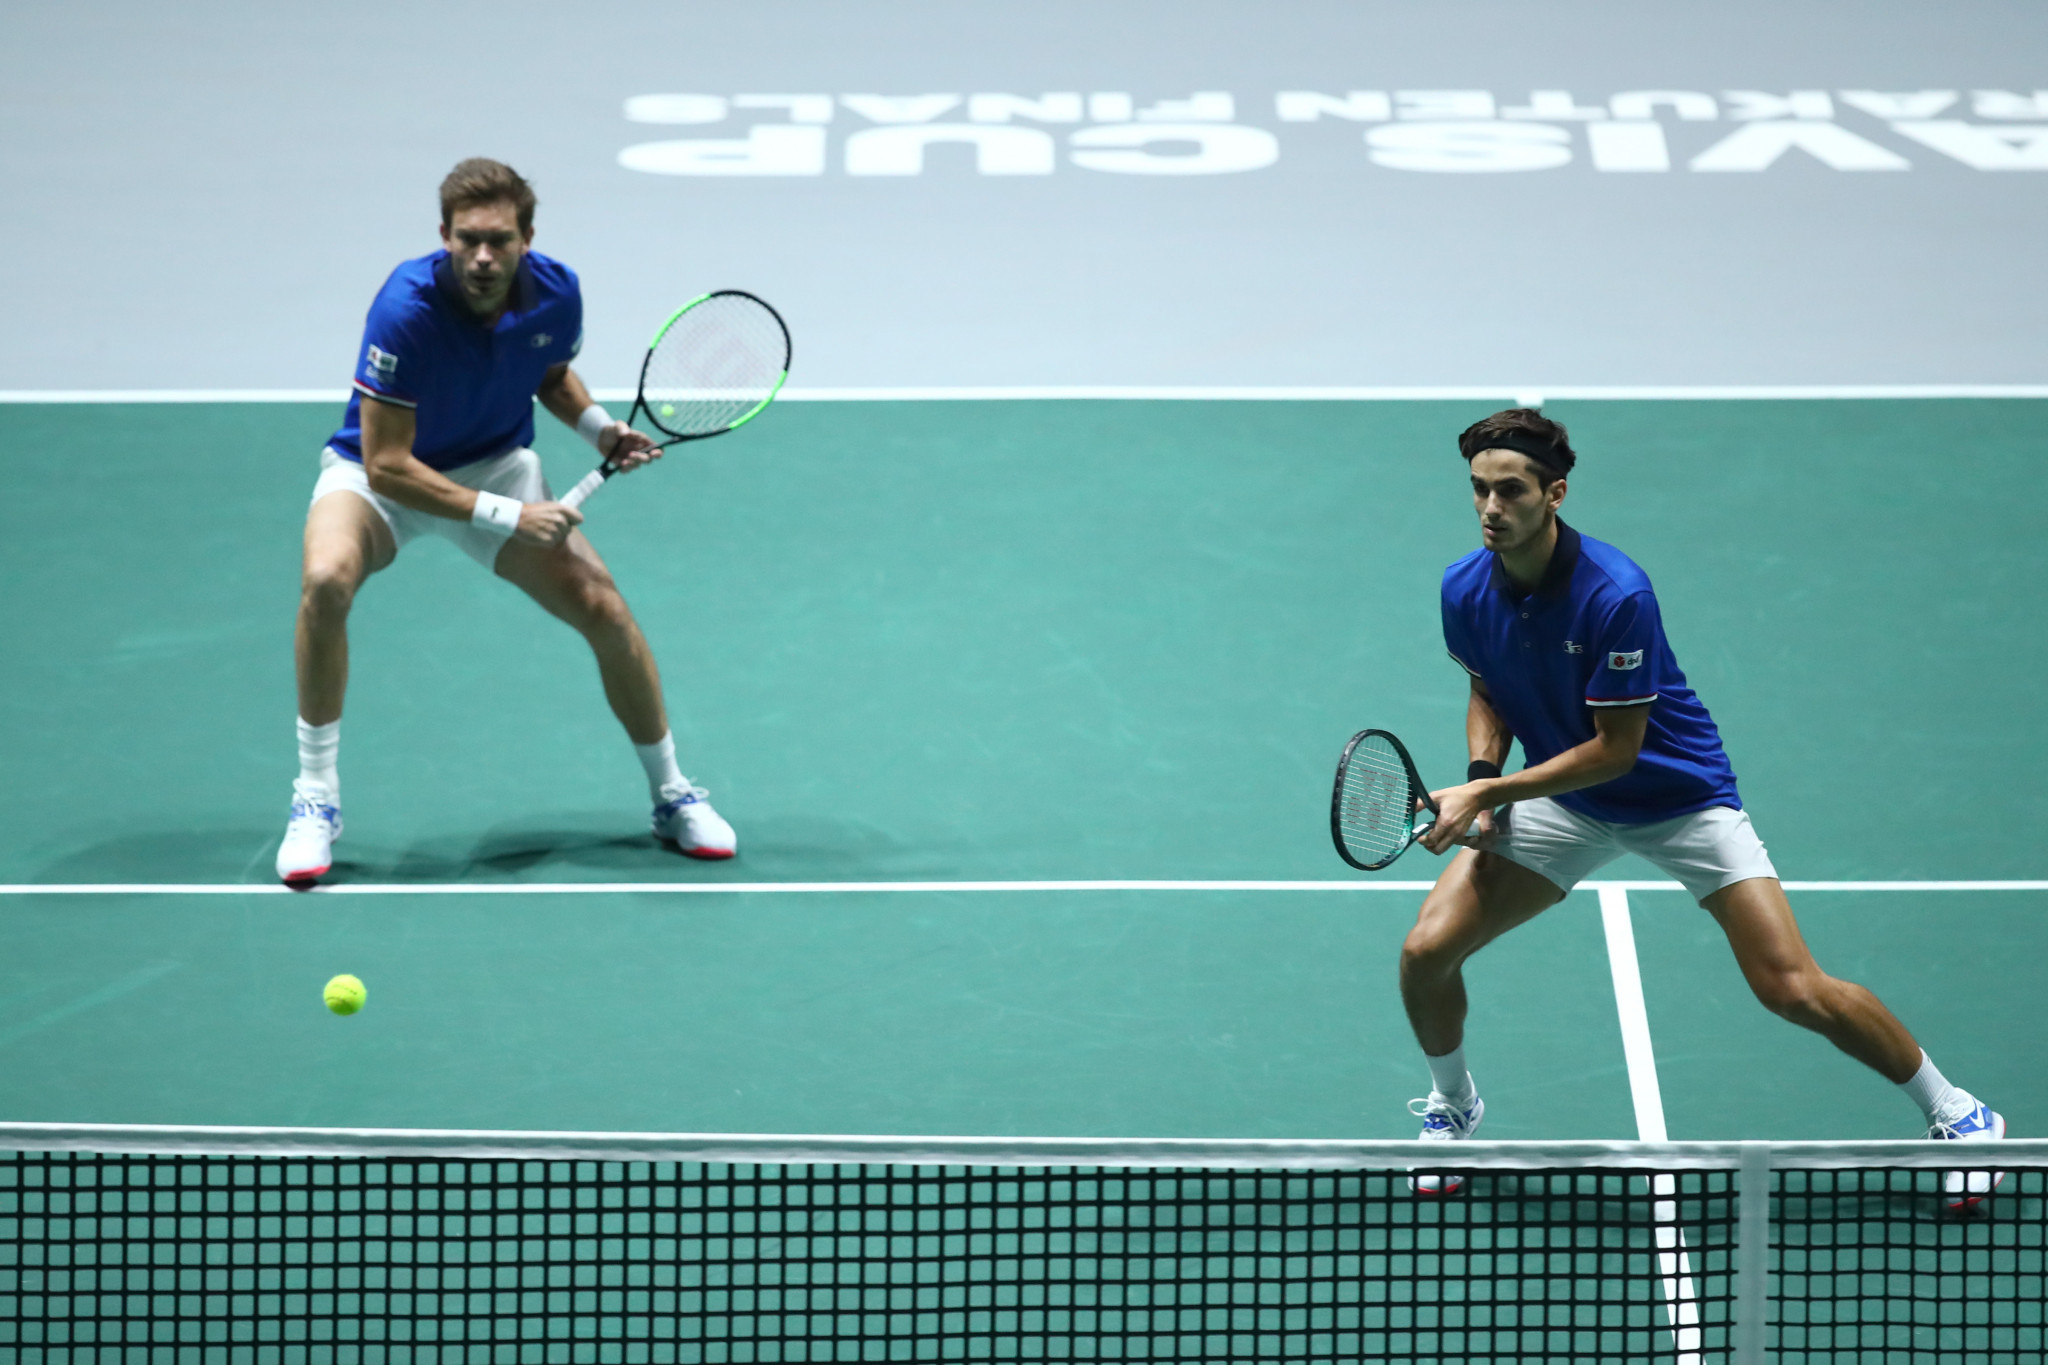 Nicolas Mahut and Pierre-Hugues Herbert helped France to a 2-1 win over Japan ©Getty Images